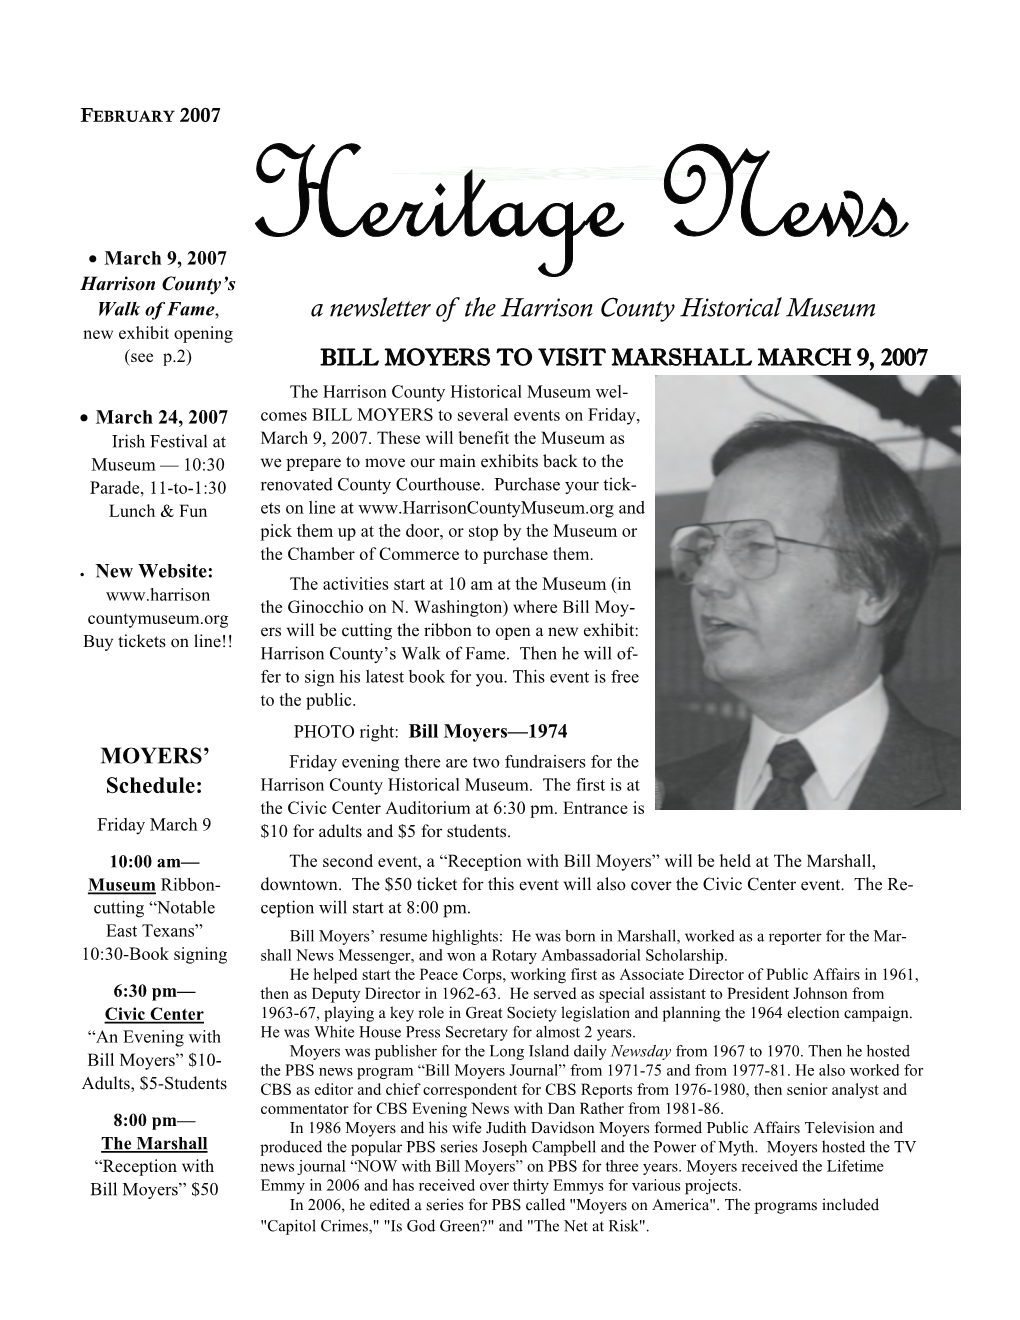 A Newsletter of the Harrison County Historical Museum New Exhibit Opening (See P.2) BILL MOYERS to VISIT MARSHALL MARCH 9, 2007